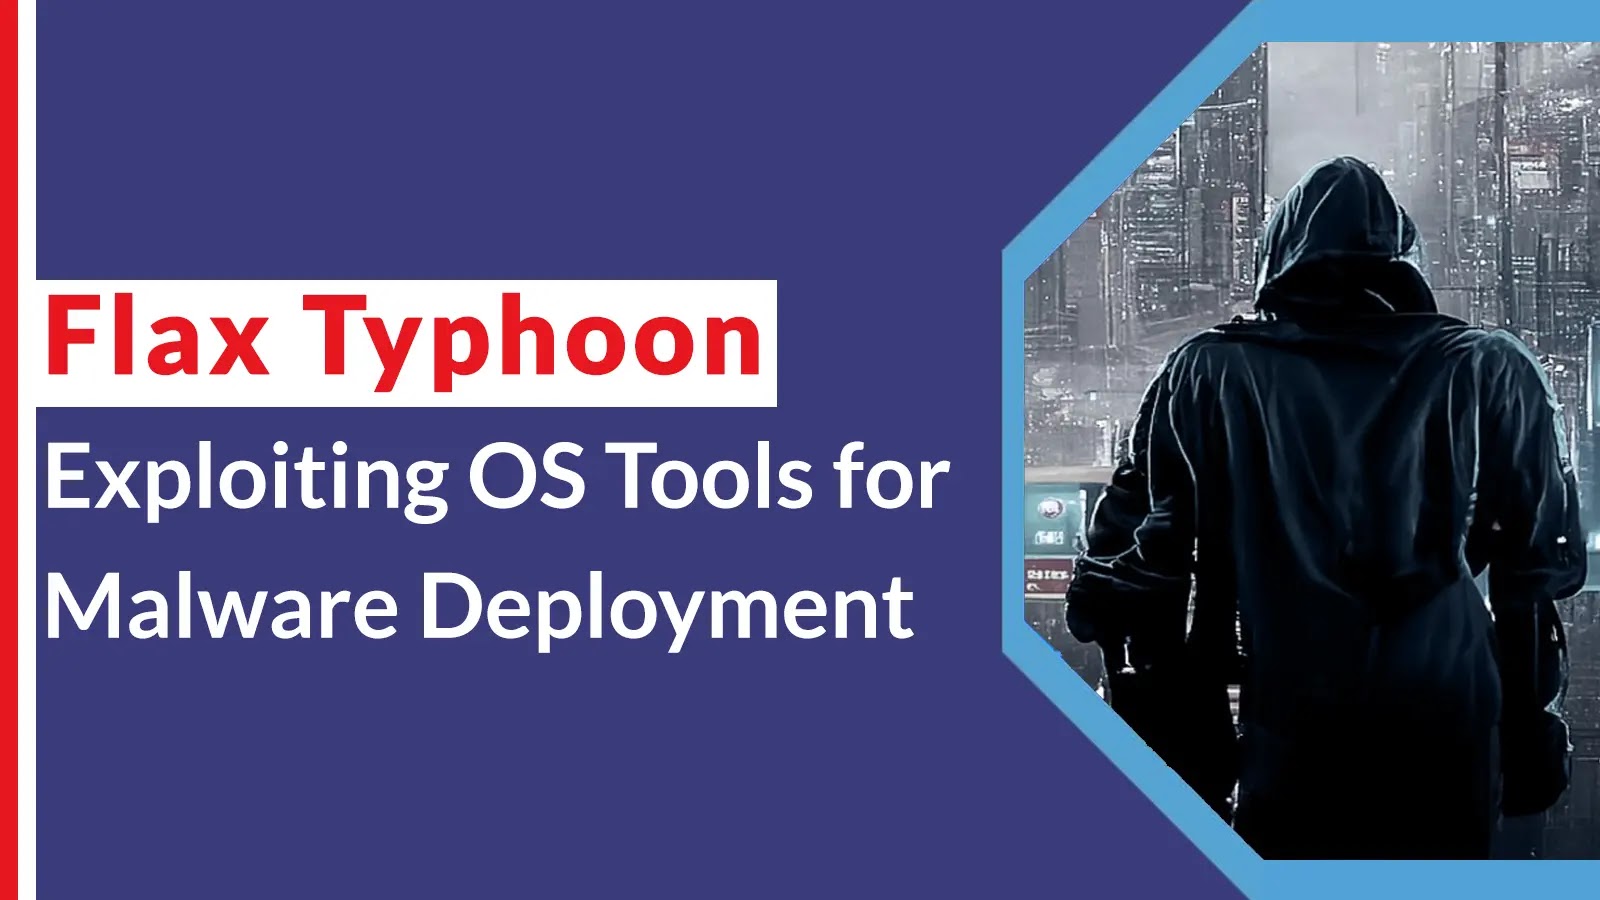 Flax Typhoon Group Abusing Built-in Operating System Tools to Deploy Malware